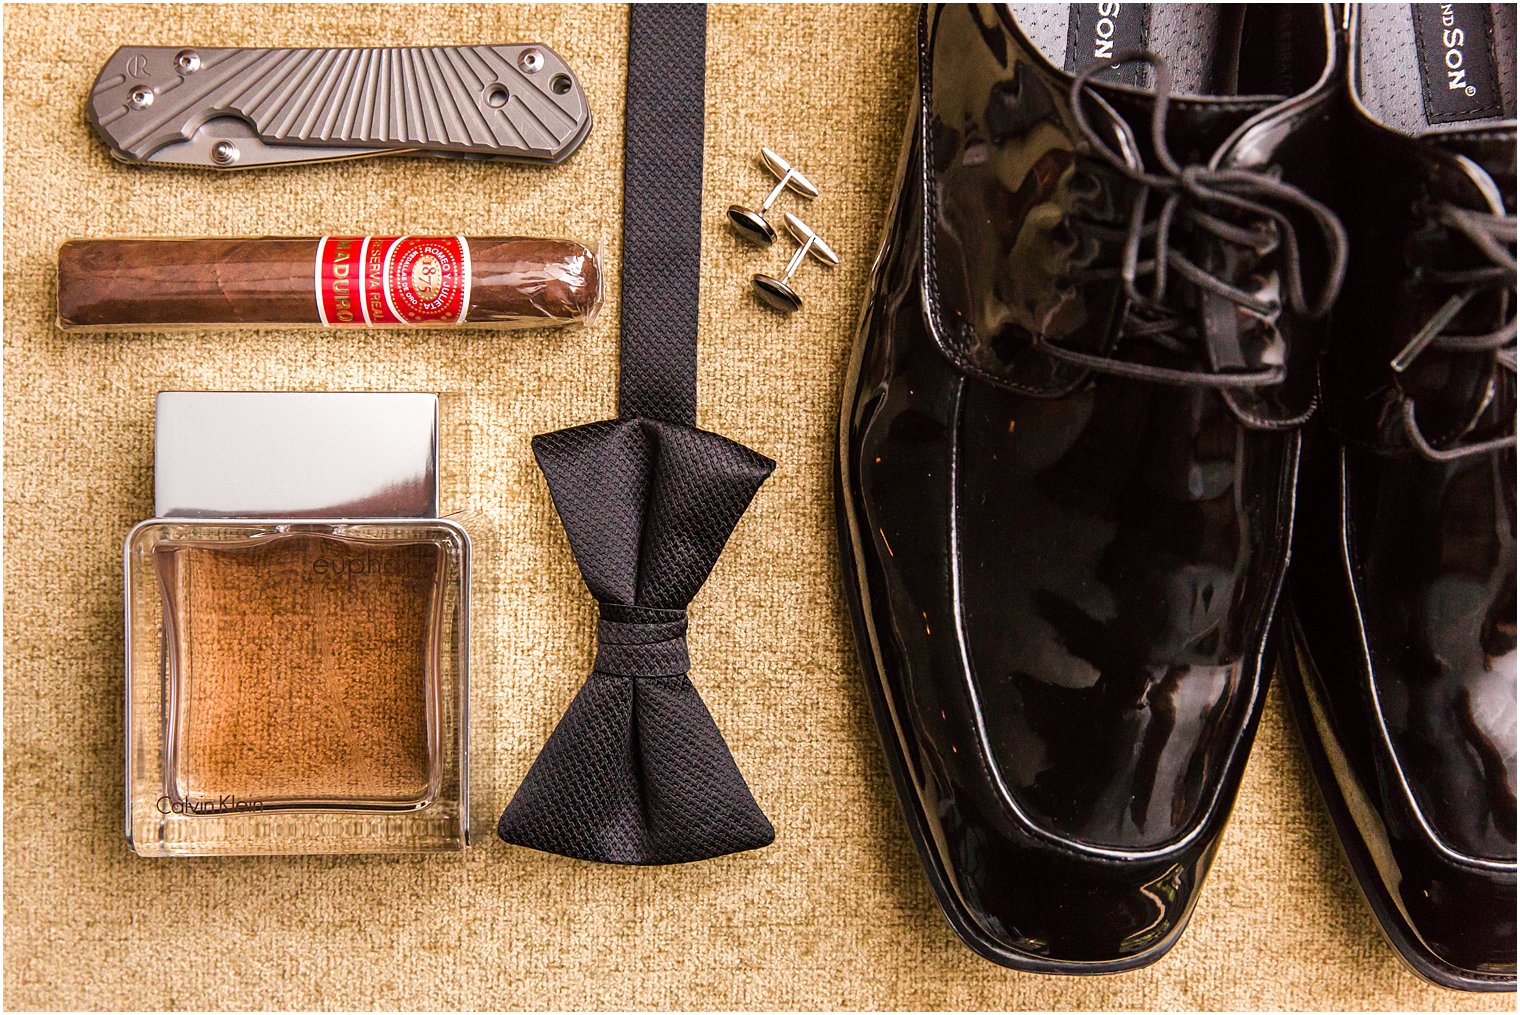 Groom bowtie, shoes, cigar, cologne, cuff links